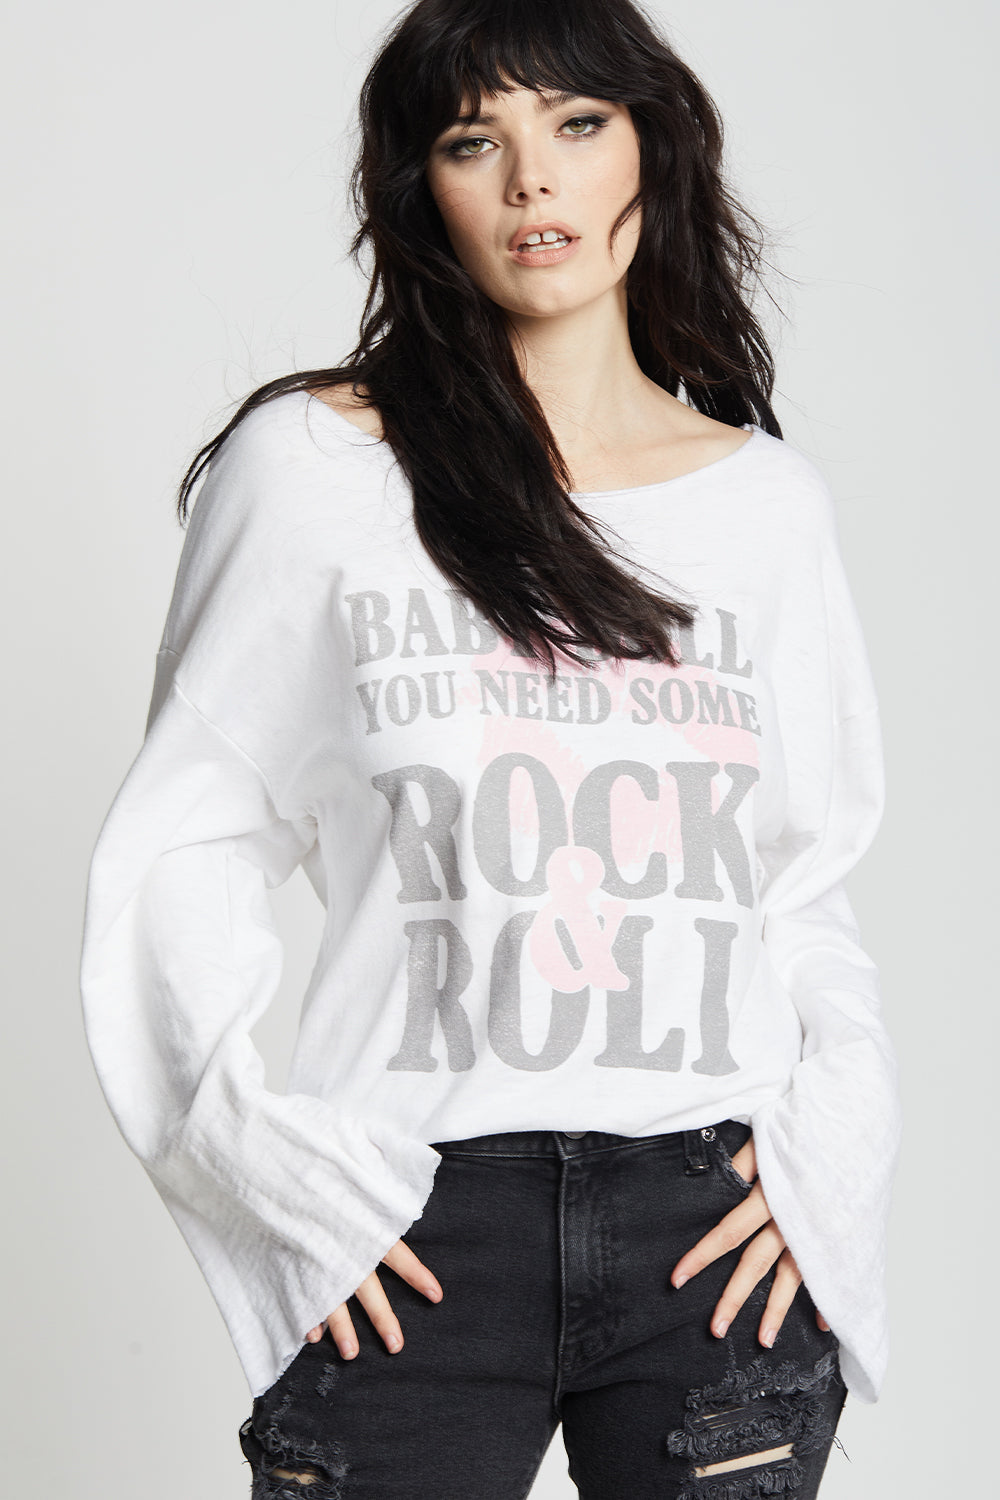 Baby Doll Rock & Roll Bell Sleeve